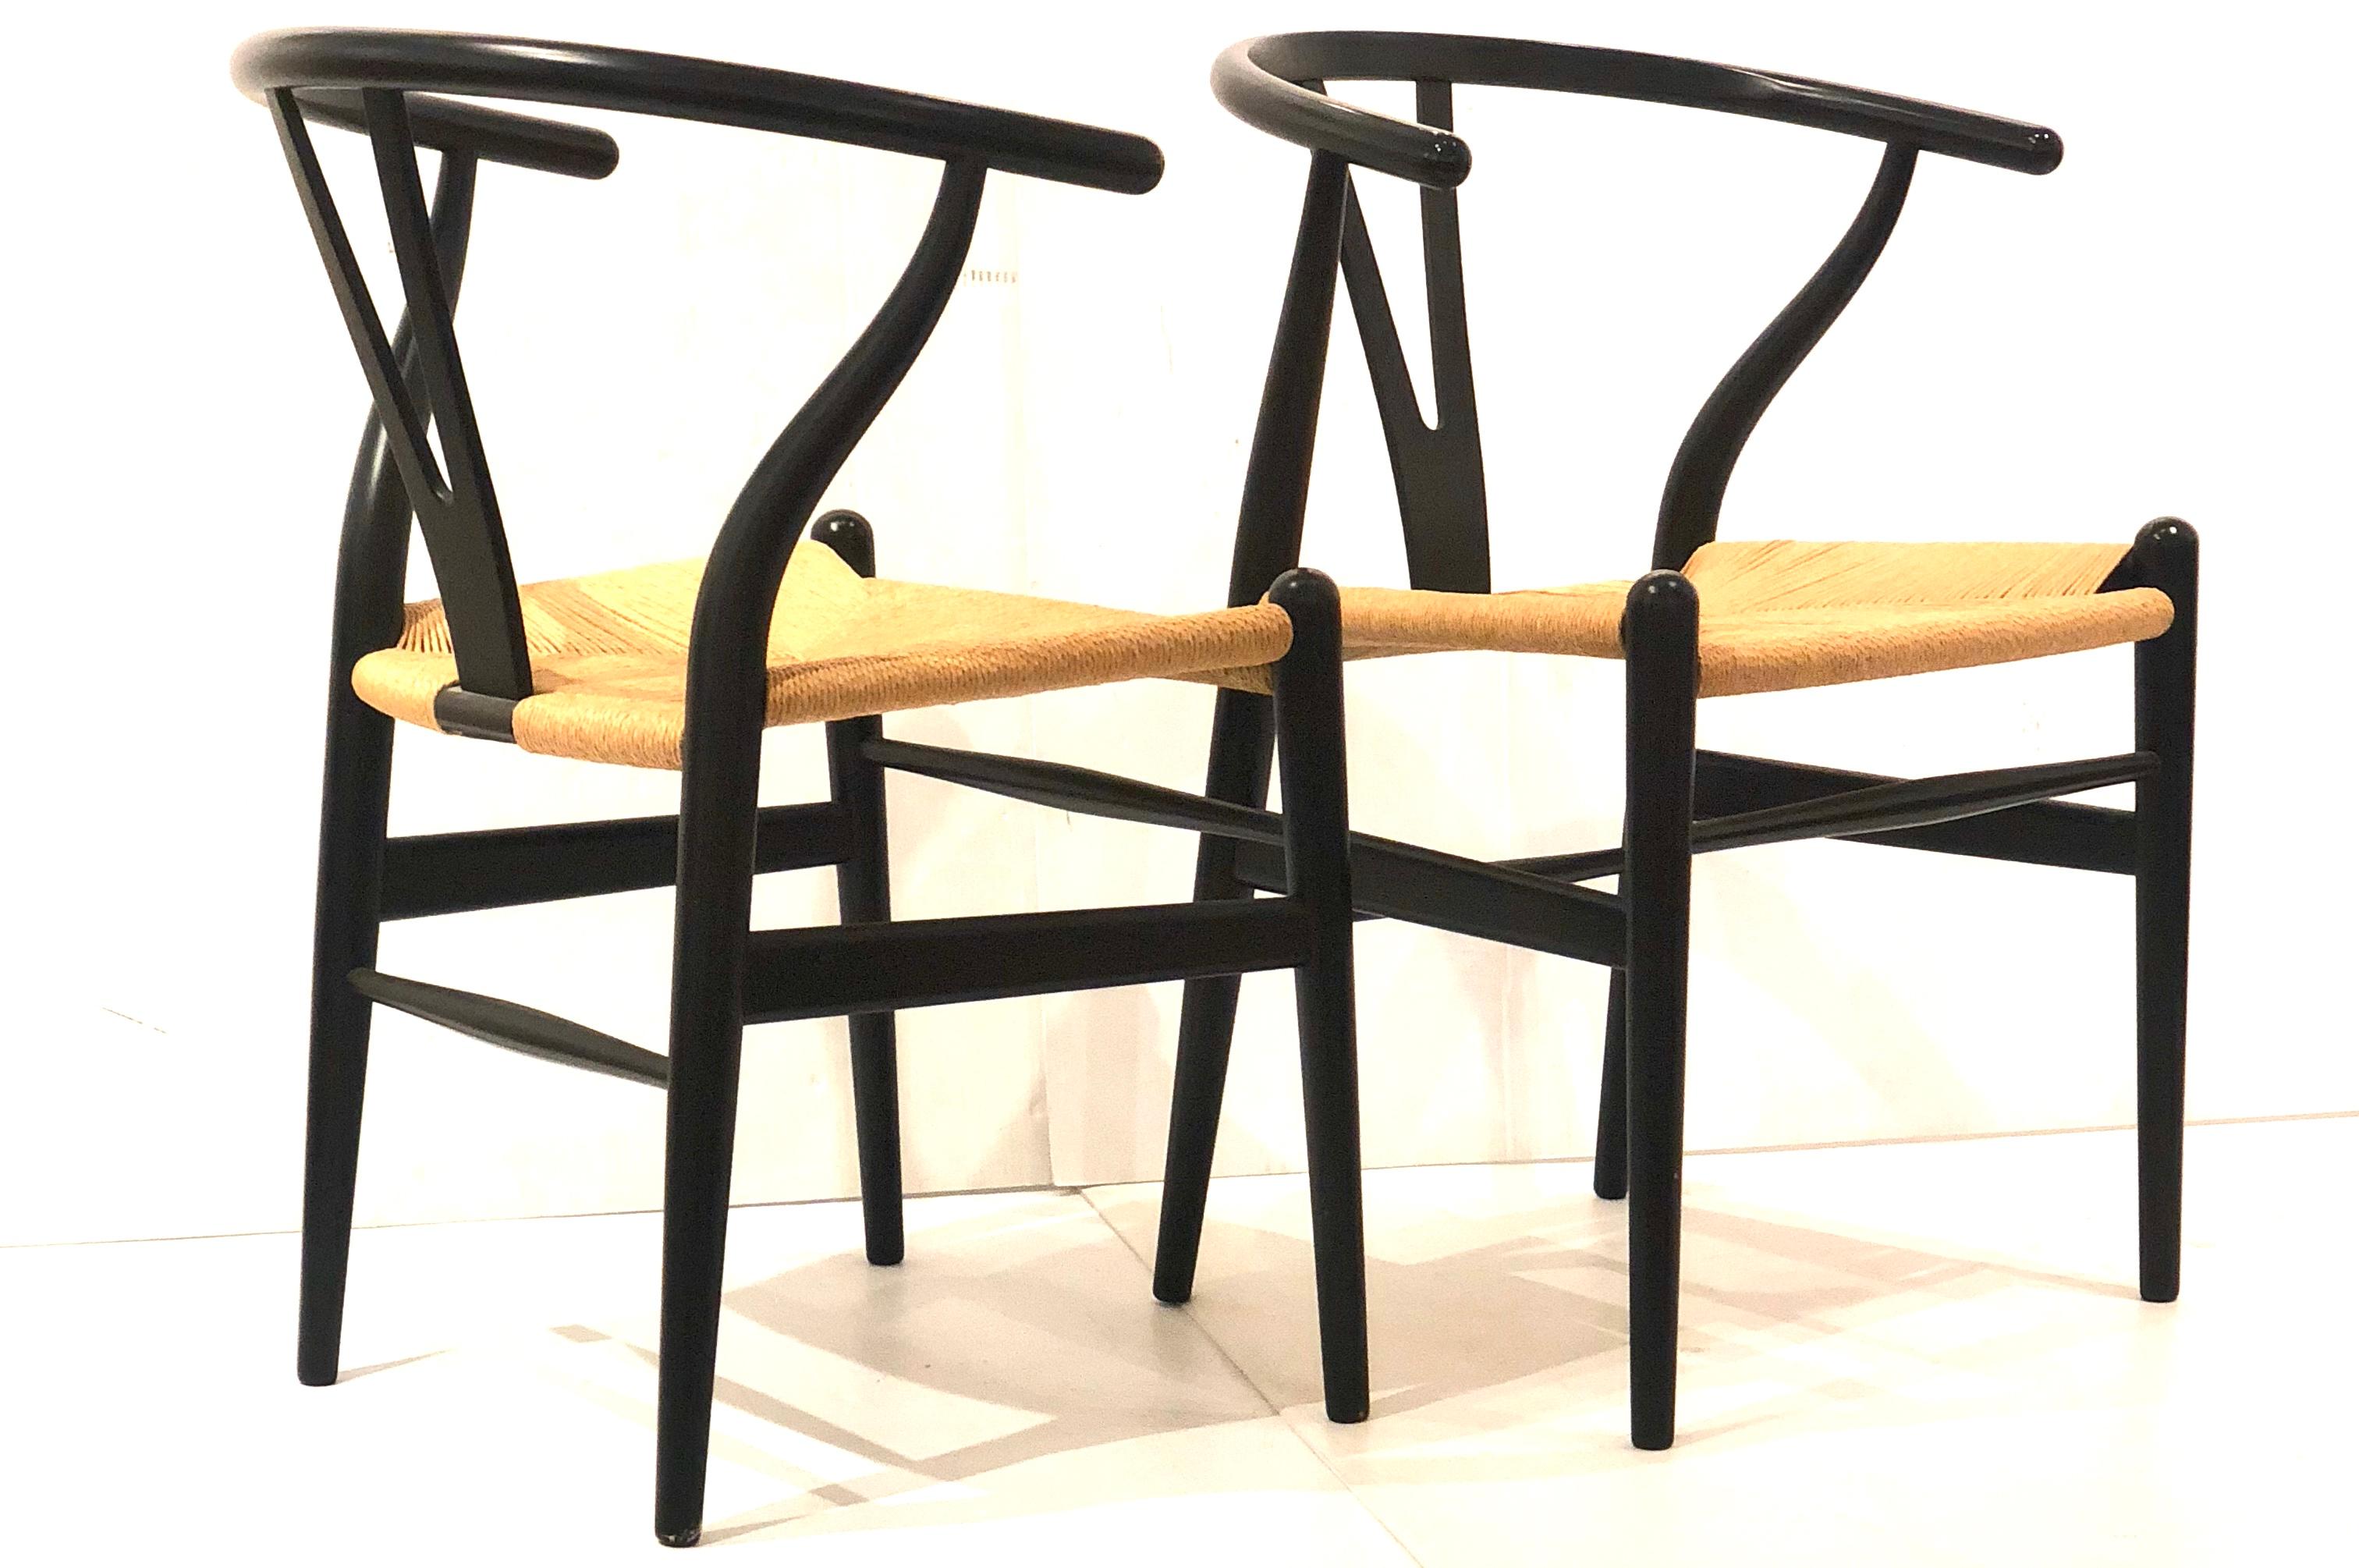 Great set of 4 Hans Wegner wishbone chairs, in beech in black satin finish, with natural woven paper cord, CH24 model , very nice and clean condition 20 years old approx and hardly ever used, solid and sturdy.